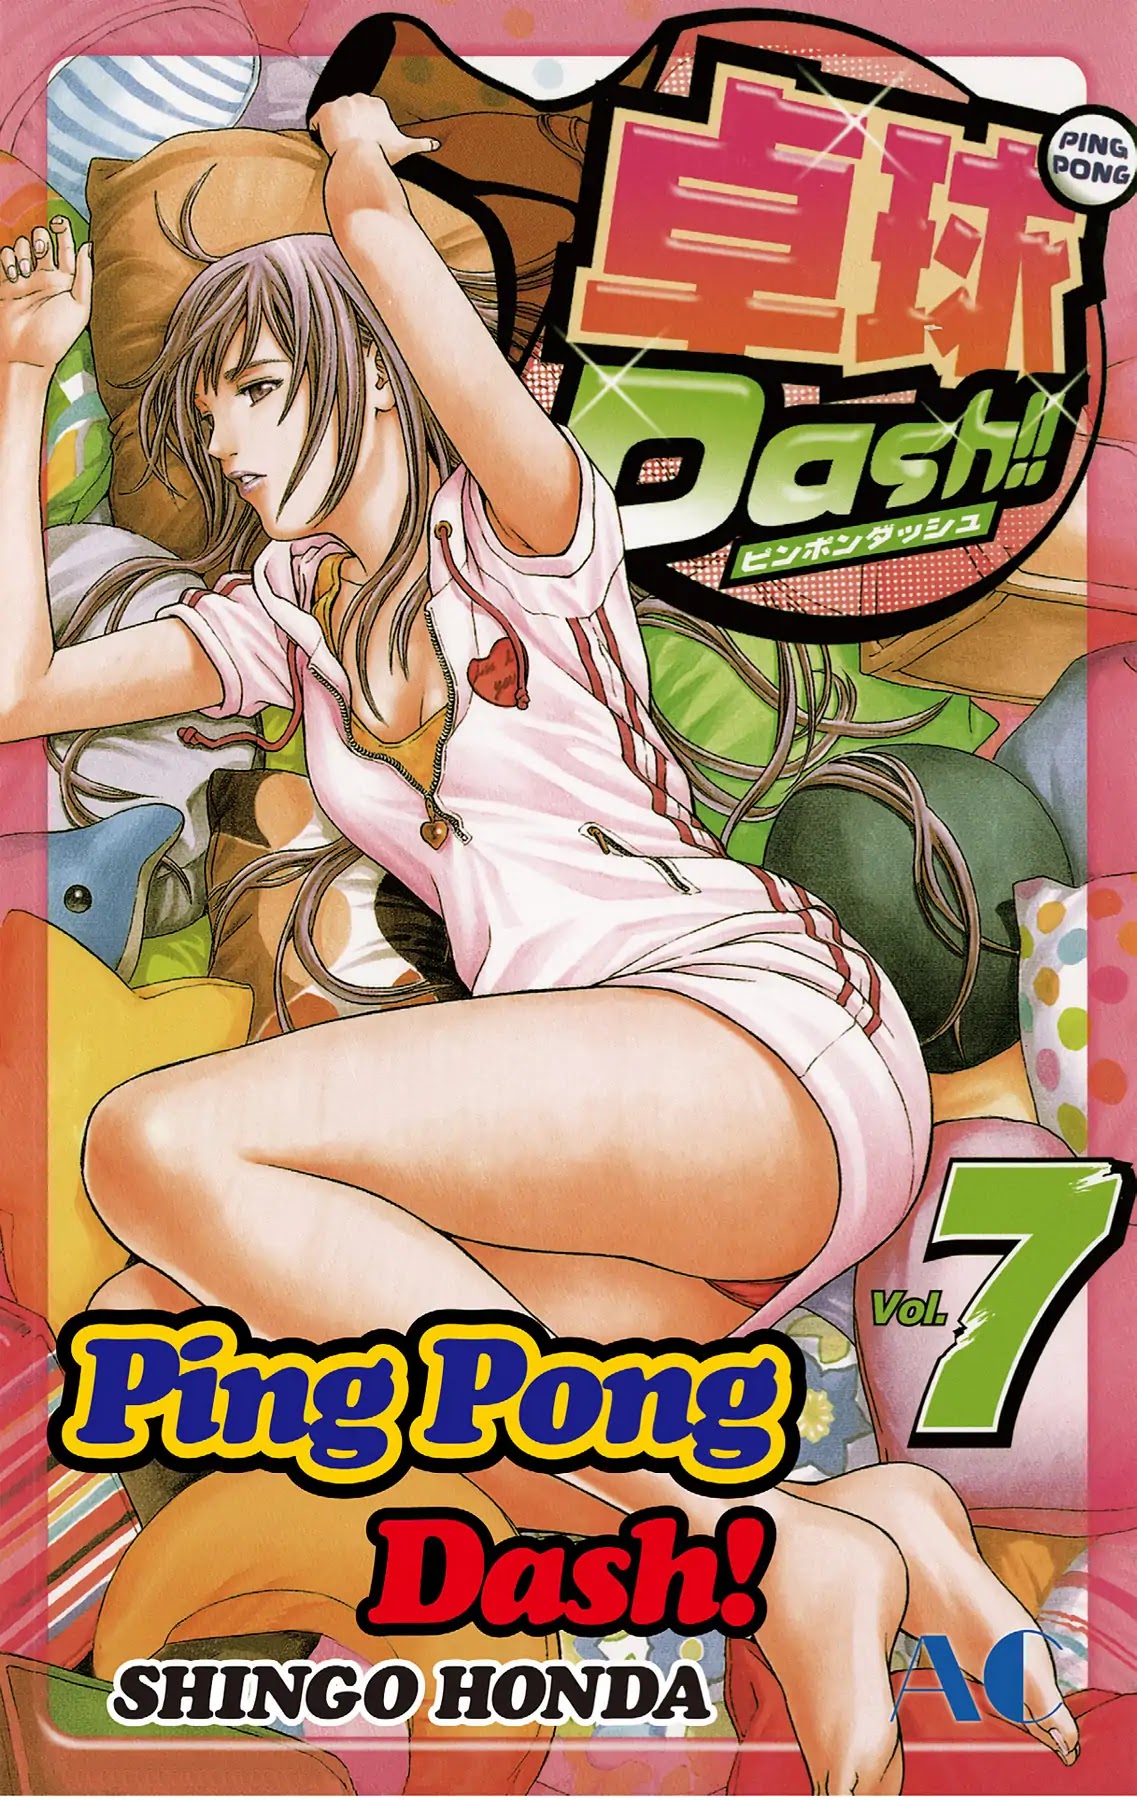 Takkyuu Dash!! Chapter 25: VOL.7 DASH #25: THE QUEEN'S PING PONG